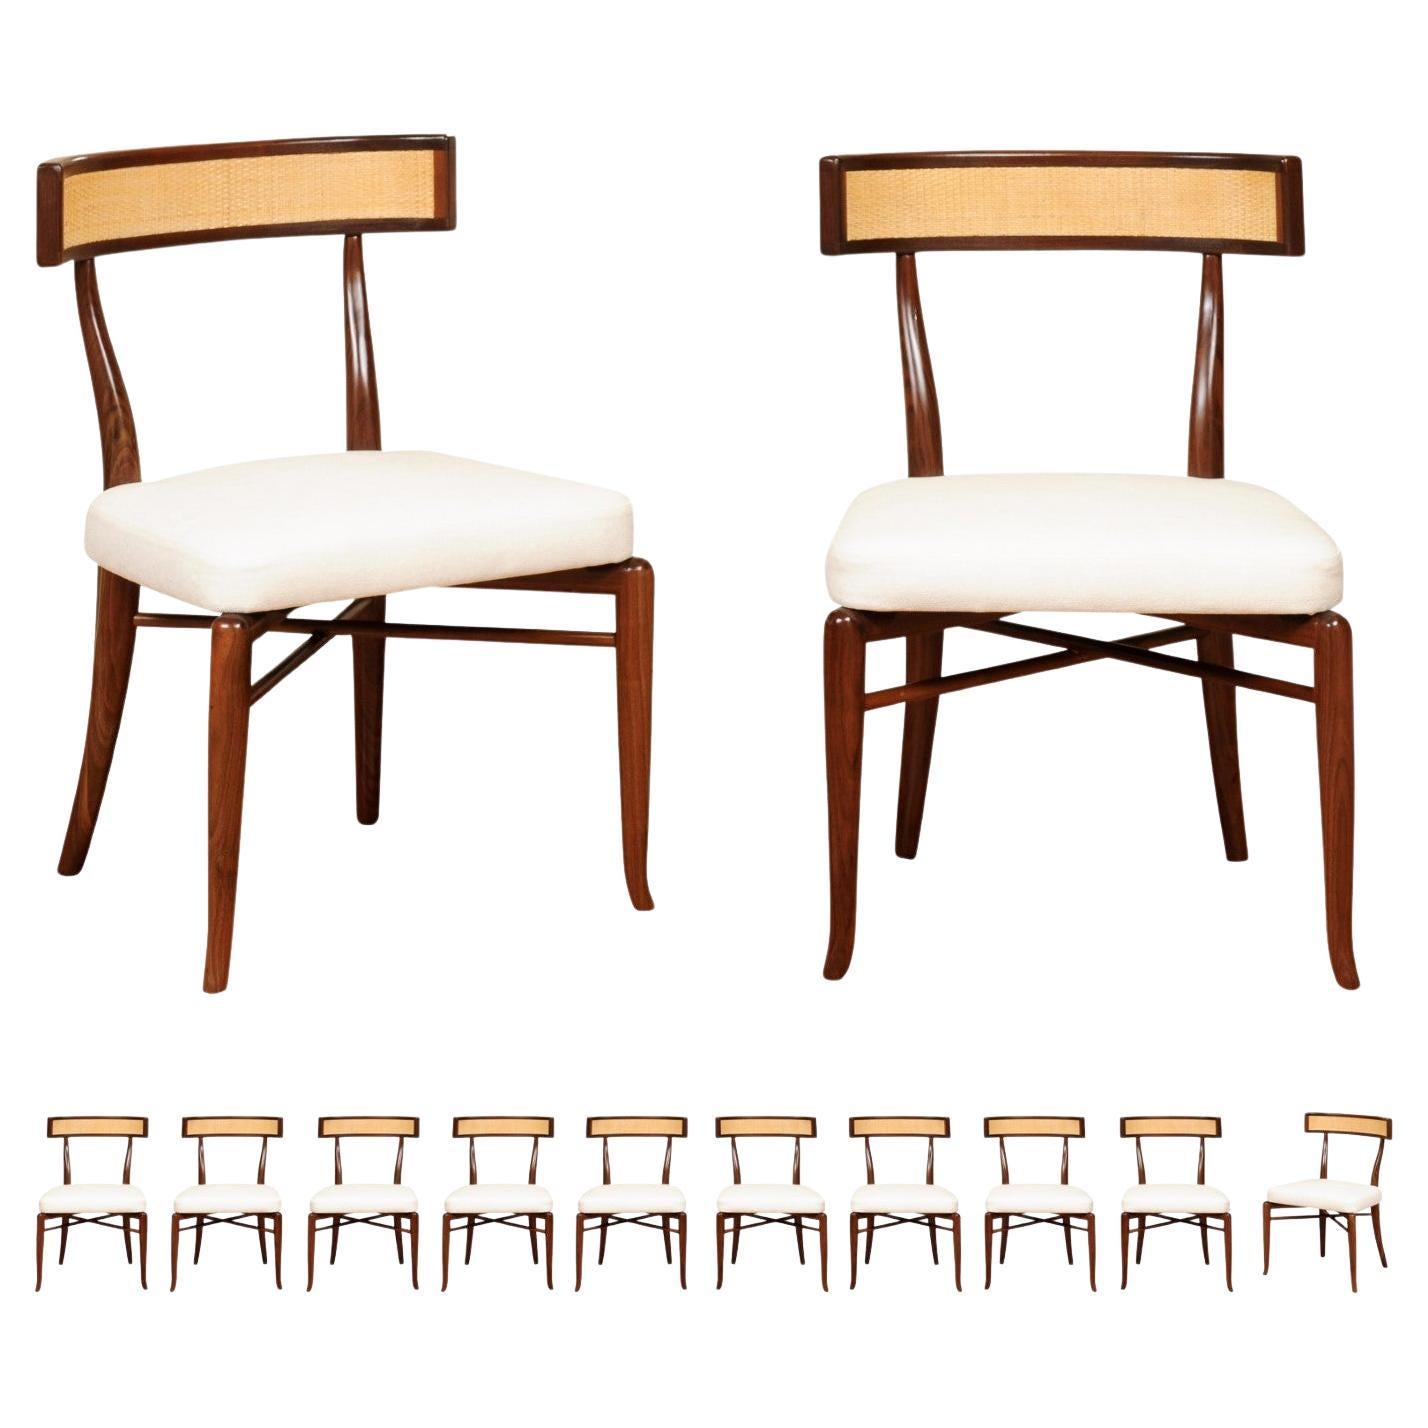 Extraordinary Set of 12 Klismos Side Chairs by Robsjohn-Gibbings, Cane Back For Sale